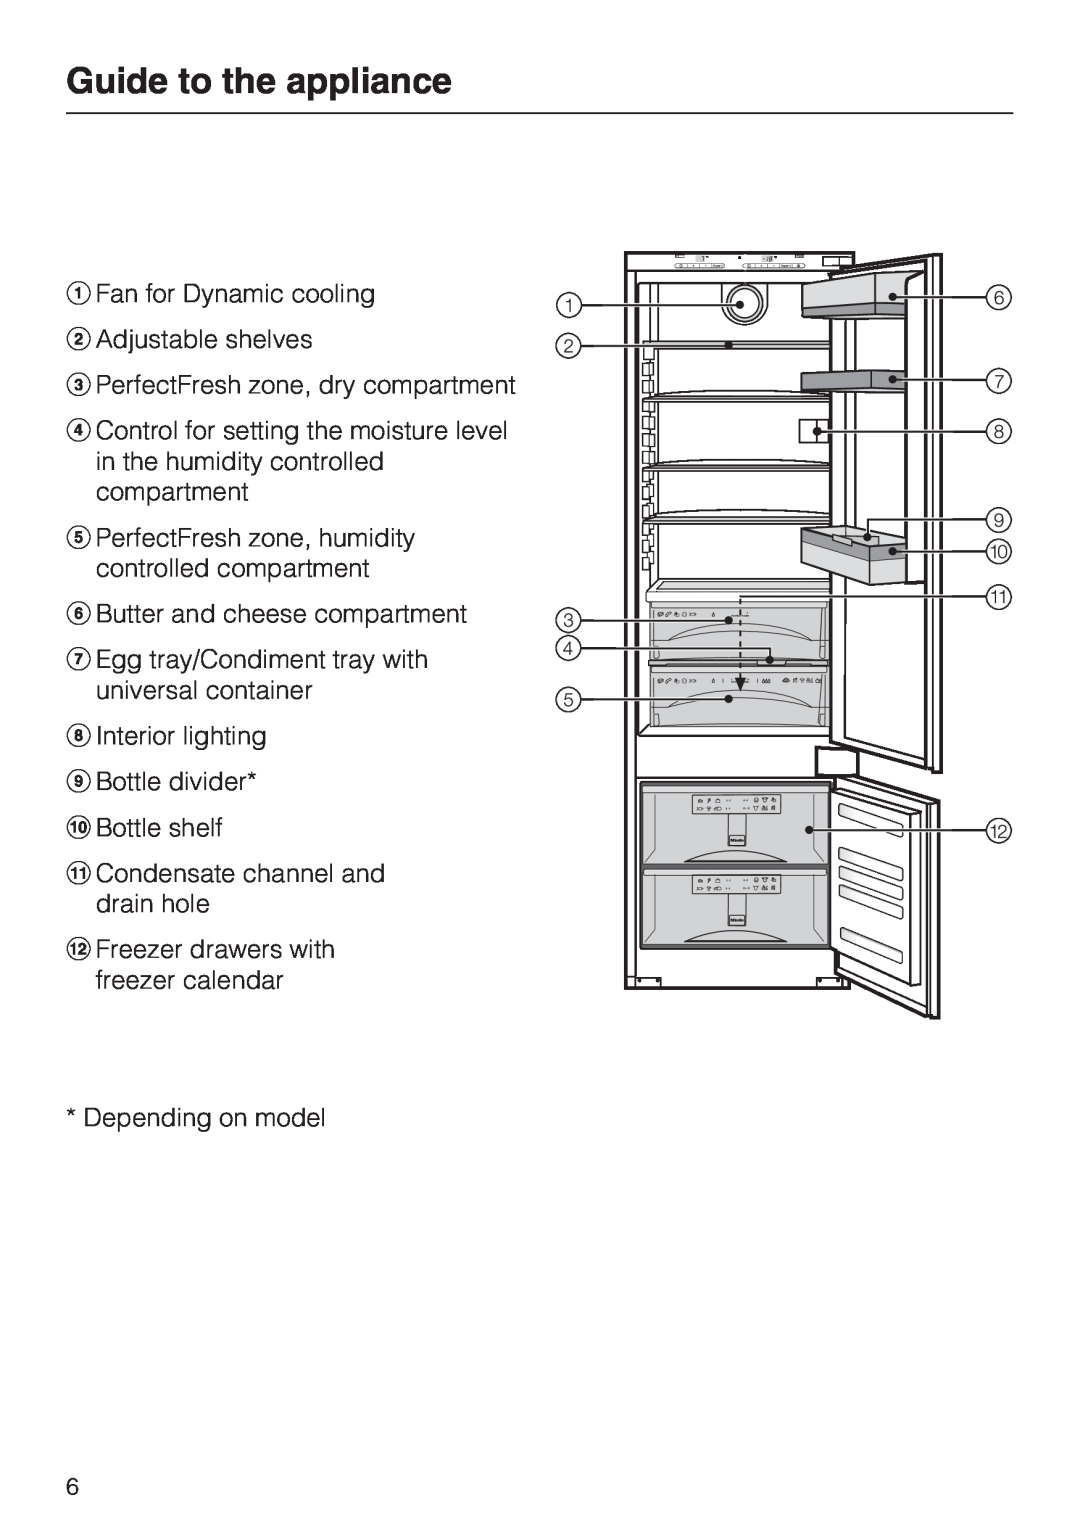 Miele KF 9757 ID installation instructions Guide to the appliance, aFan for Dynamic cooling bAdjustable shelves 